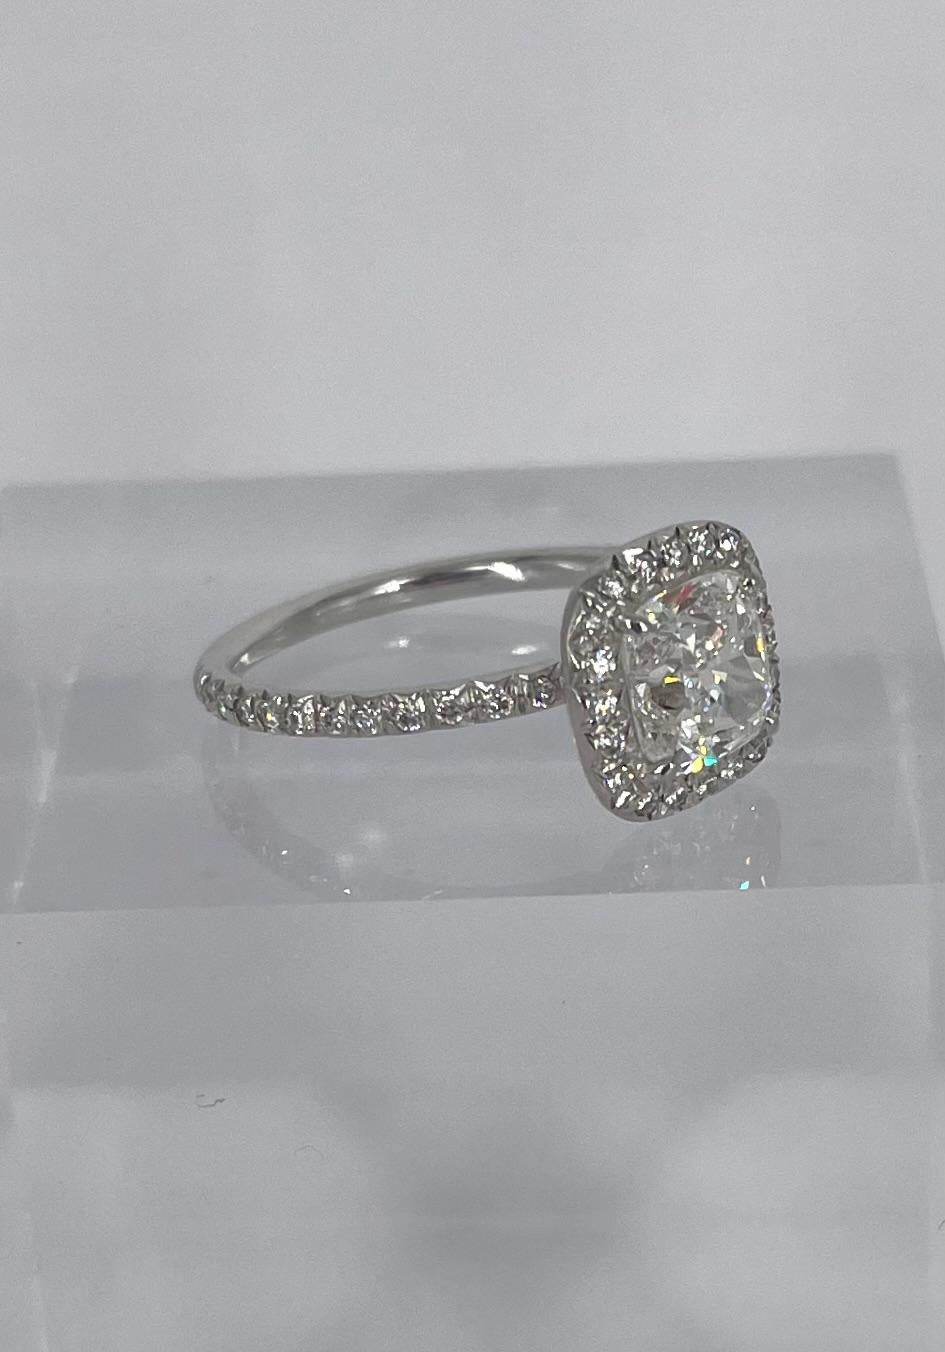 J. Birnbach 1.51 carat Cushion Cut Diamond Halo Engagement Ring in Platinum In New Condition For Sale In New York, NY